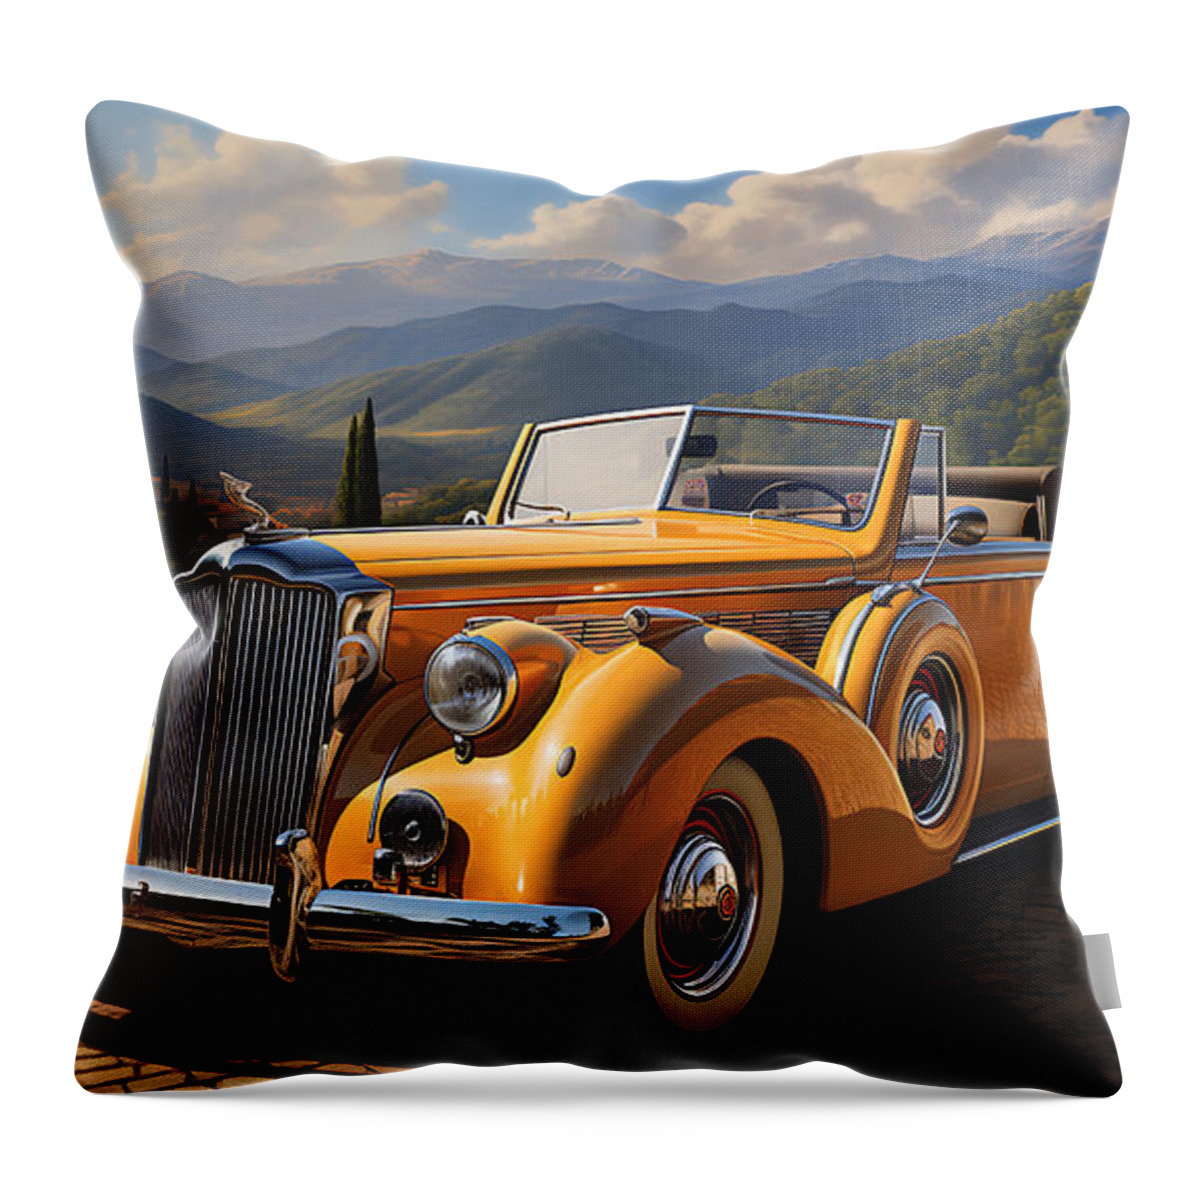 1942 Packard Twelve Convertible Victoria Art Throw Pillow featuring the painting 1942 Packard Twelve Convertible Victoria by Asar Studios #2 by Celestial Images